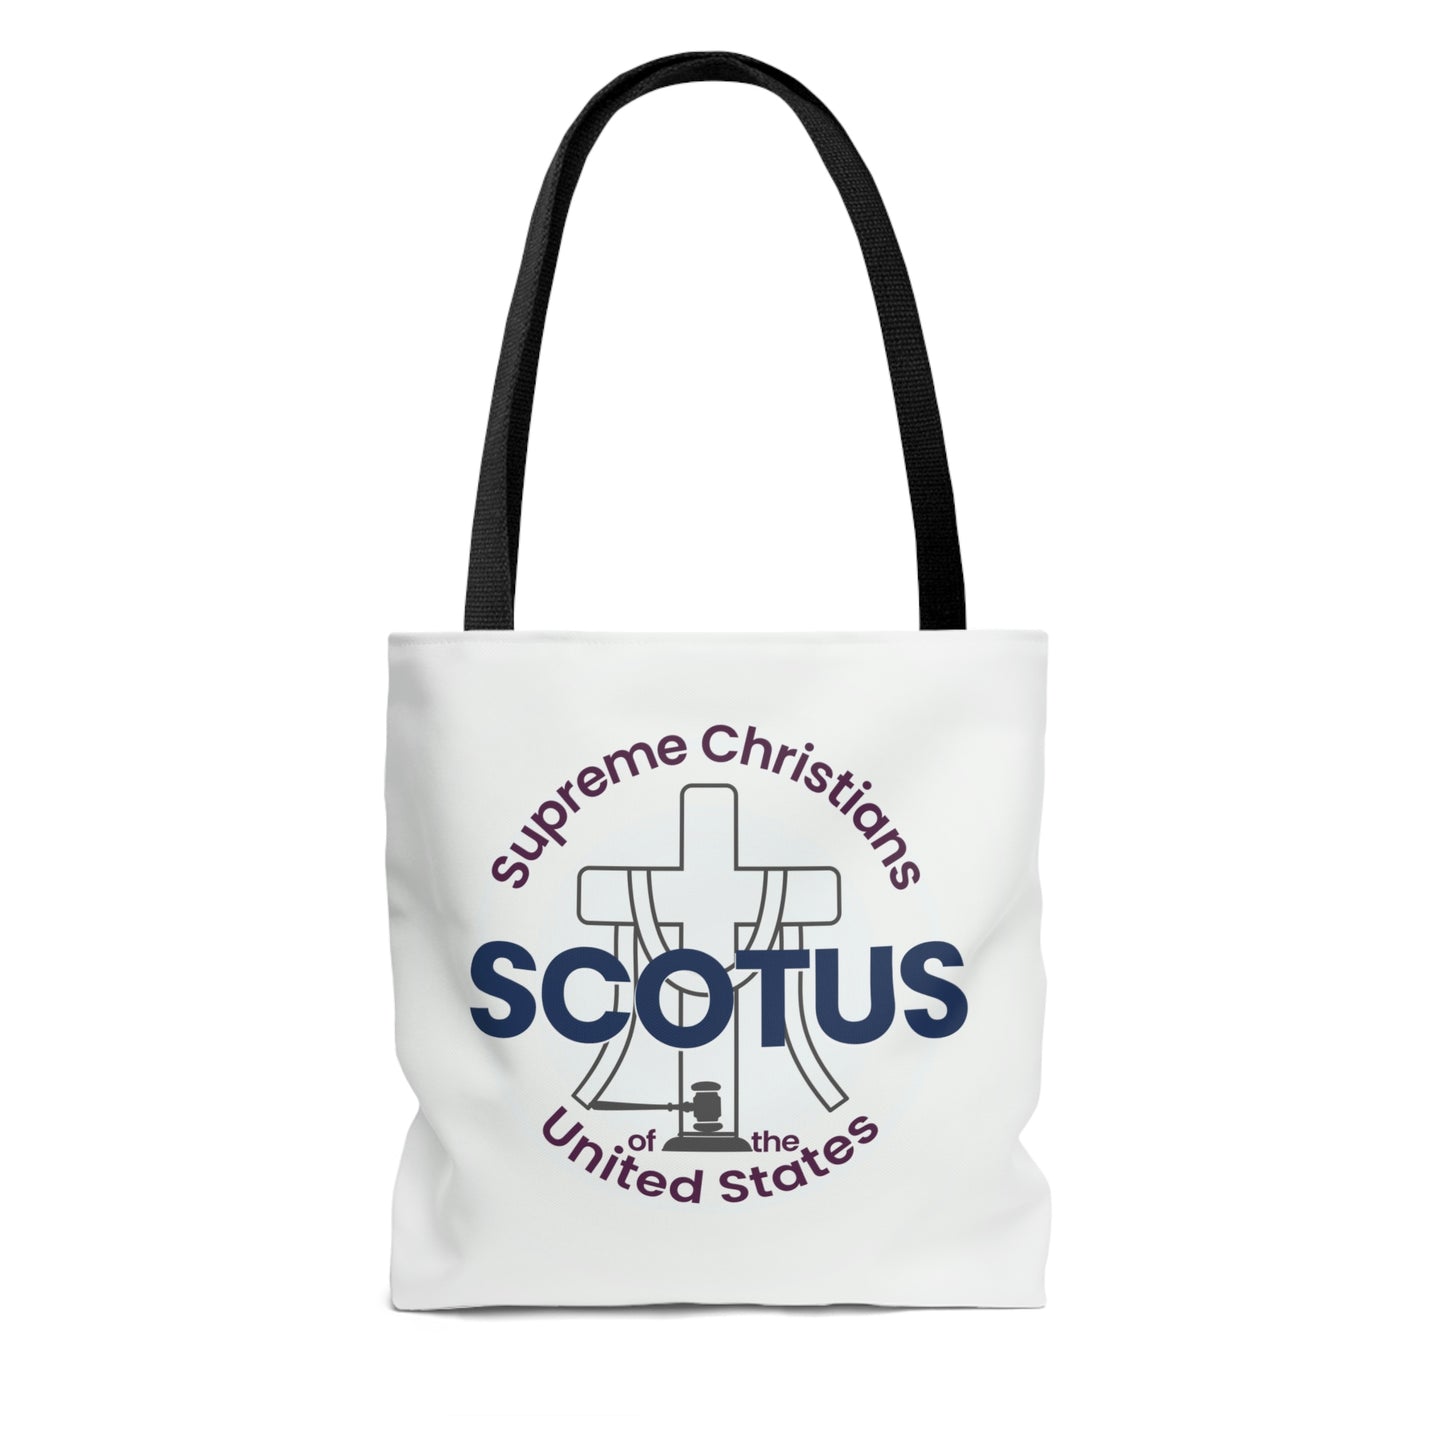 SCOTUS [Supreme Christians of the US] AOP Tote Bag in 3 sizes